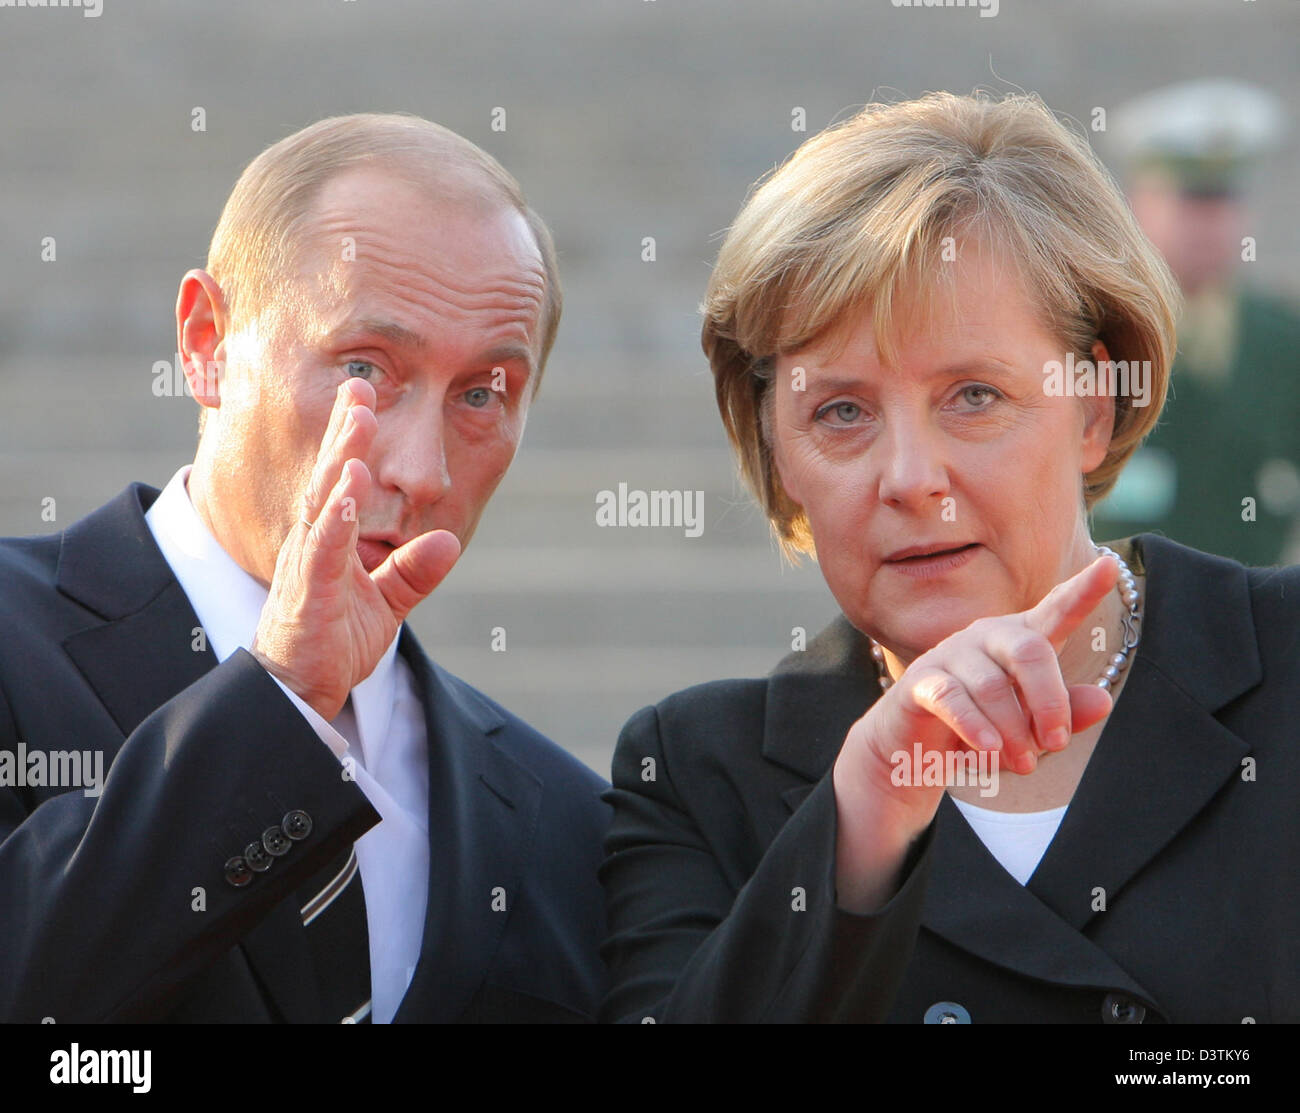 German Chancellor Angela Merkel (R) and Russian President Vladimr Putin (L) walk to the uncovering of a statue of the Russian author Fyodor Dostoevsky (1821 - 1881) on the banks of the river Elbe in Dresden, Germany, Tuesday, 10 October 2006. The statue was designed by Russian sculptor Alexander Rukawischnikow. Photo: Matthias Hiekel Stock Photo